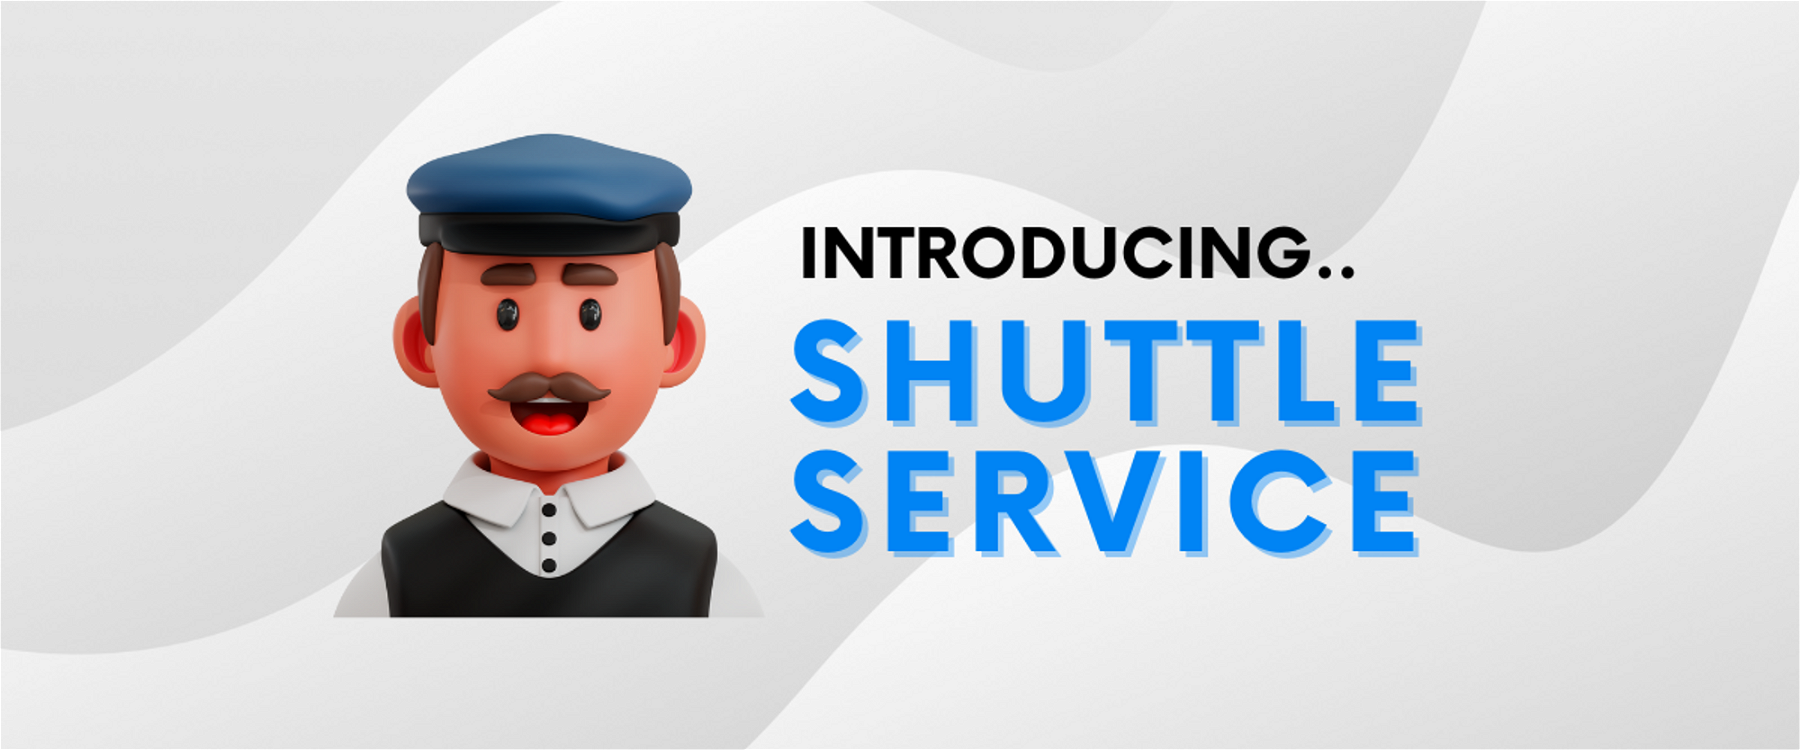 Introducing Shuttle Service To Help You Dash Better (Enhanced)